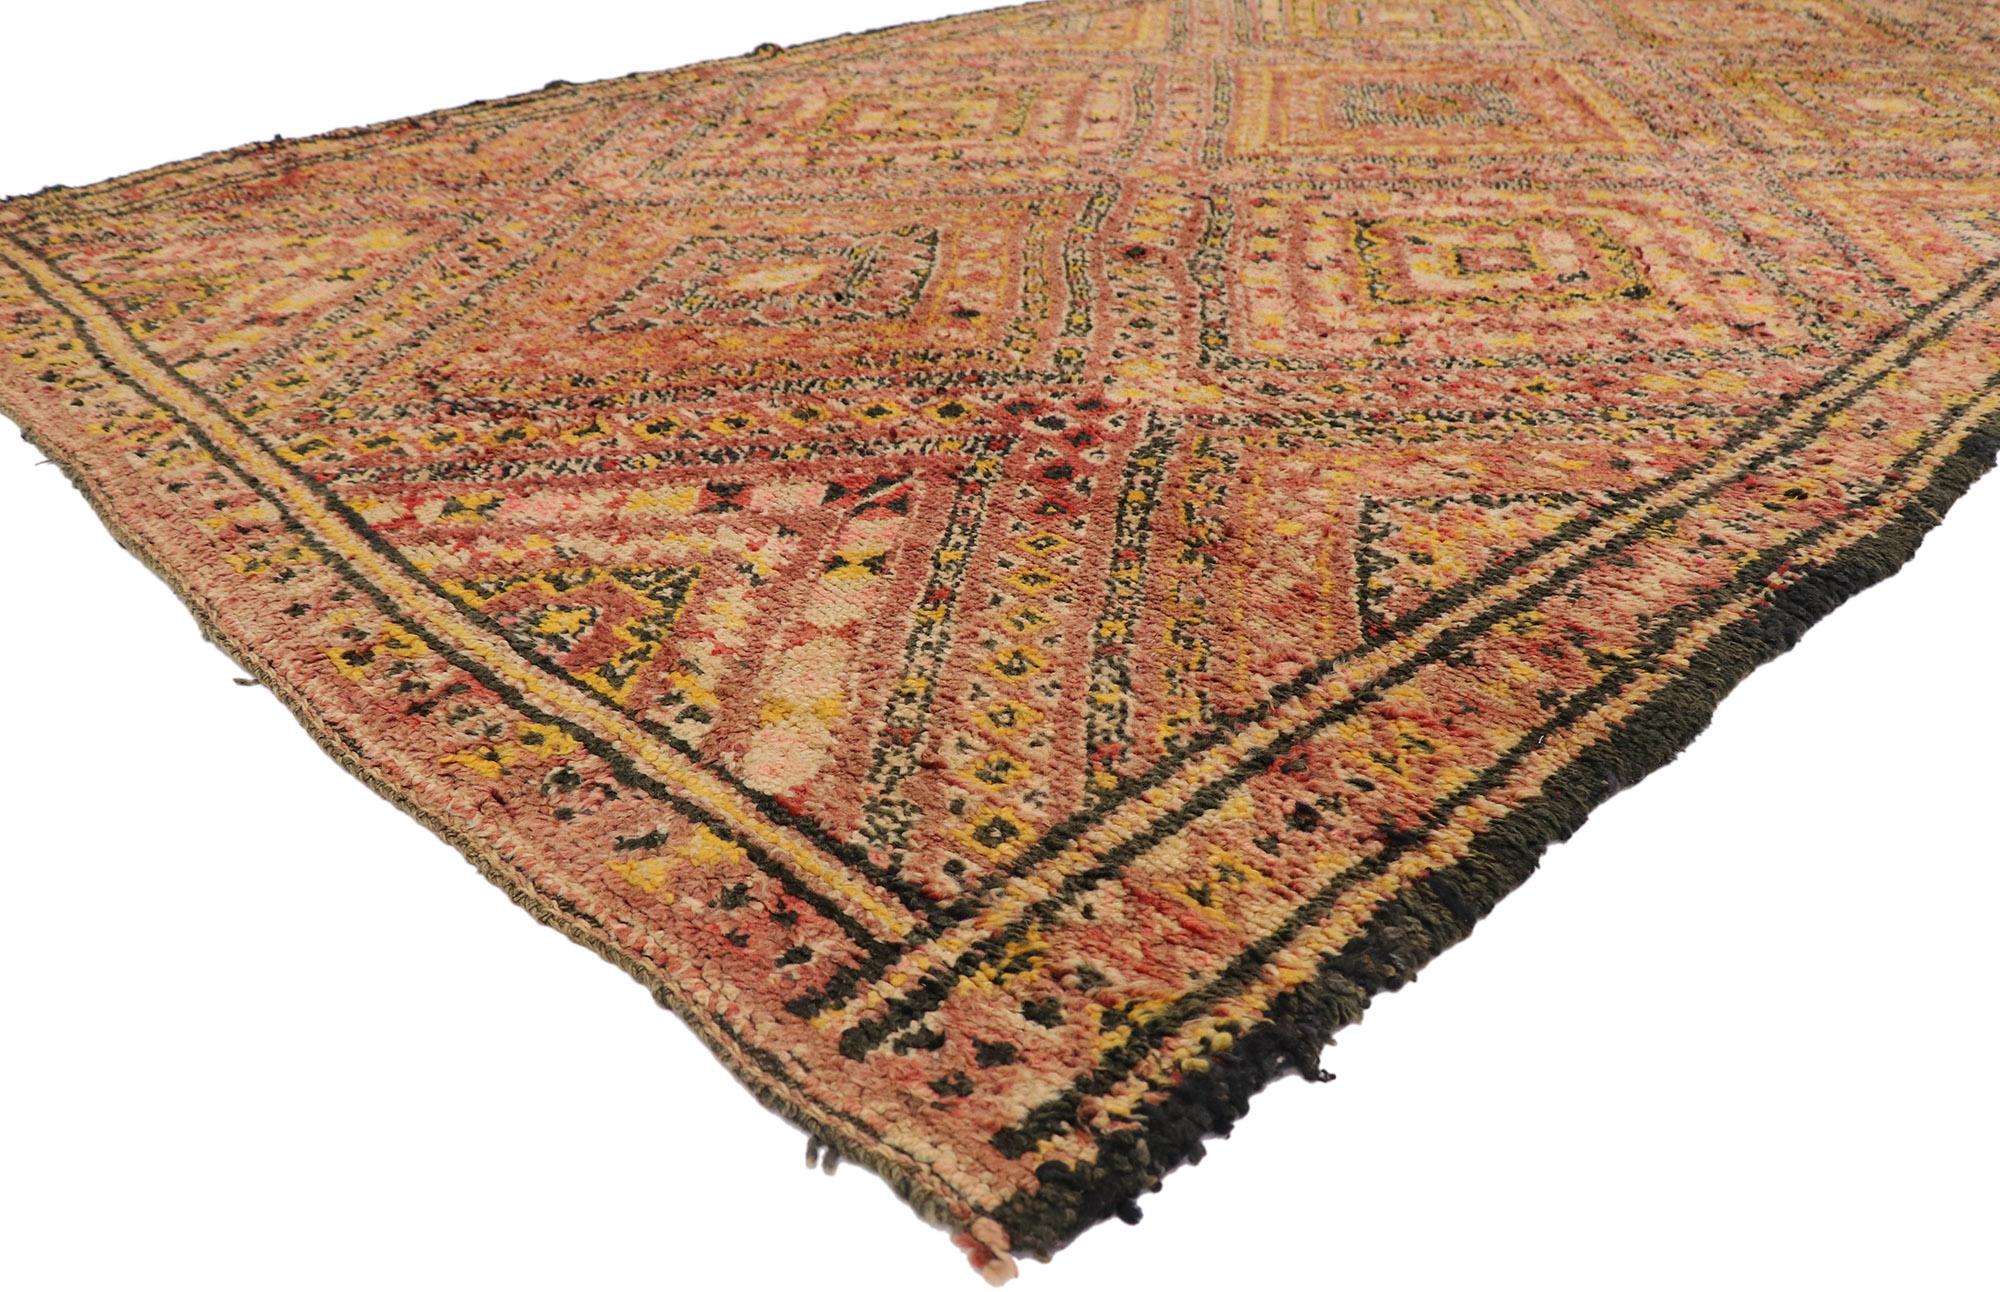 21277 Vintage Berber Beni M'Guild Moroccan rug with Mid-Century Modern Style 06'11 x 11'10. Showcasing a bold expressive design, incredible detail and texture, this hand knotted wool vintage Berber Beni M'Guild Moroccan rug is a captivating vision